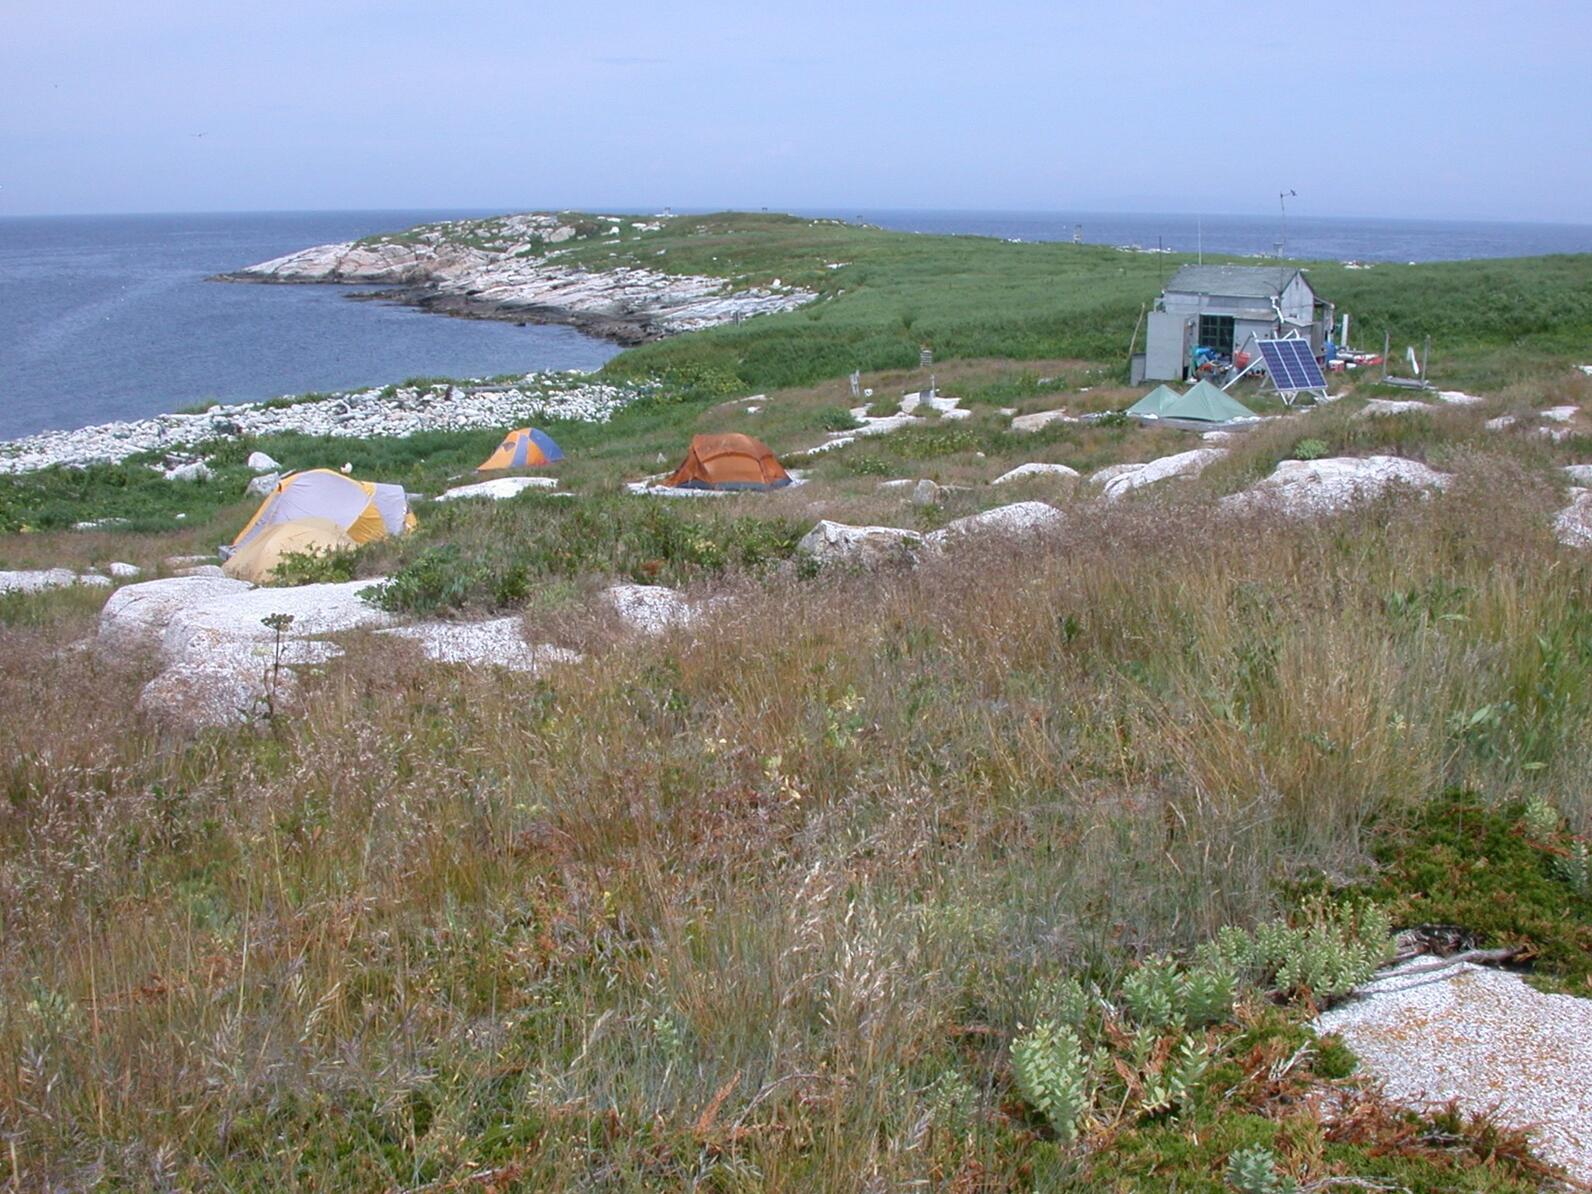 North End of Seal Island NWR with tents and cabin